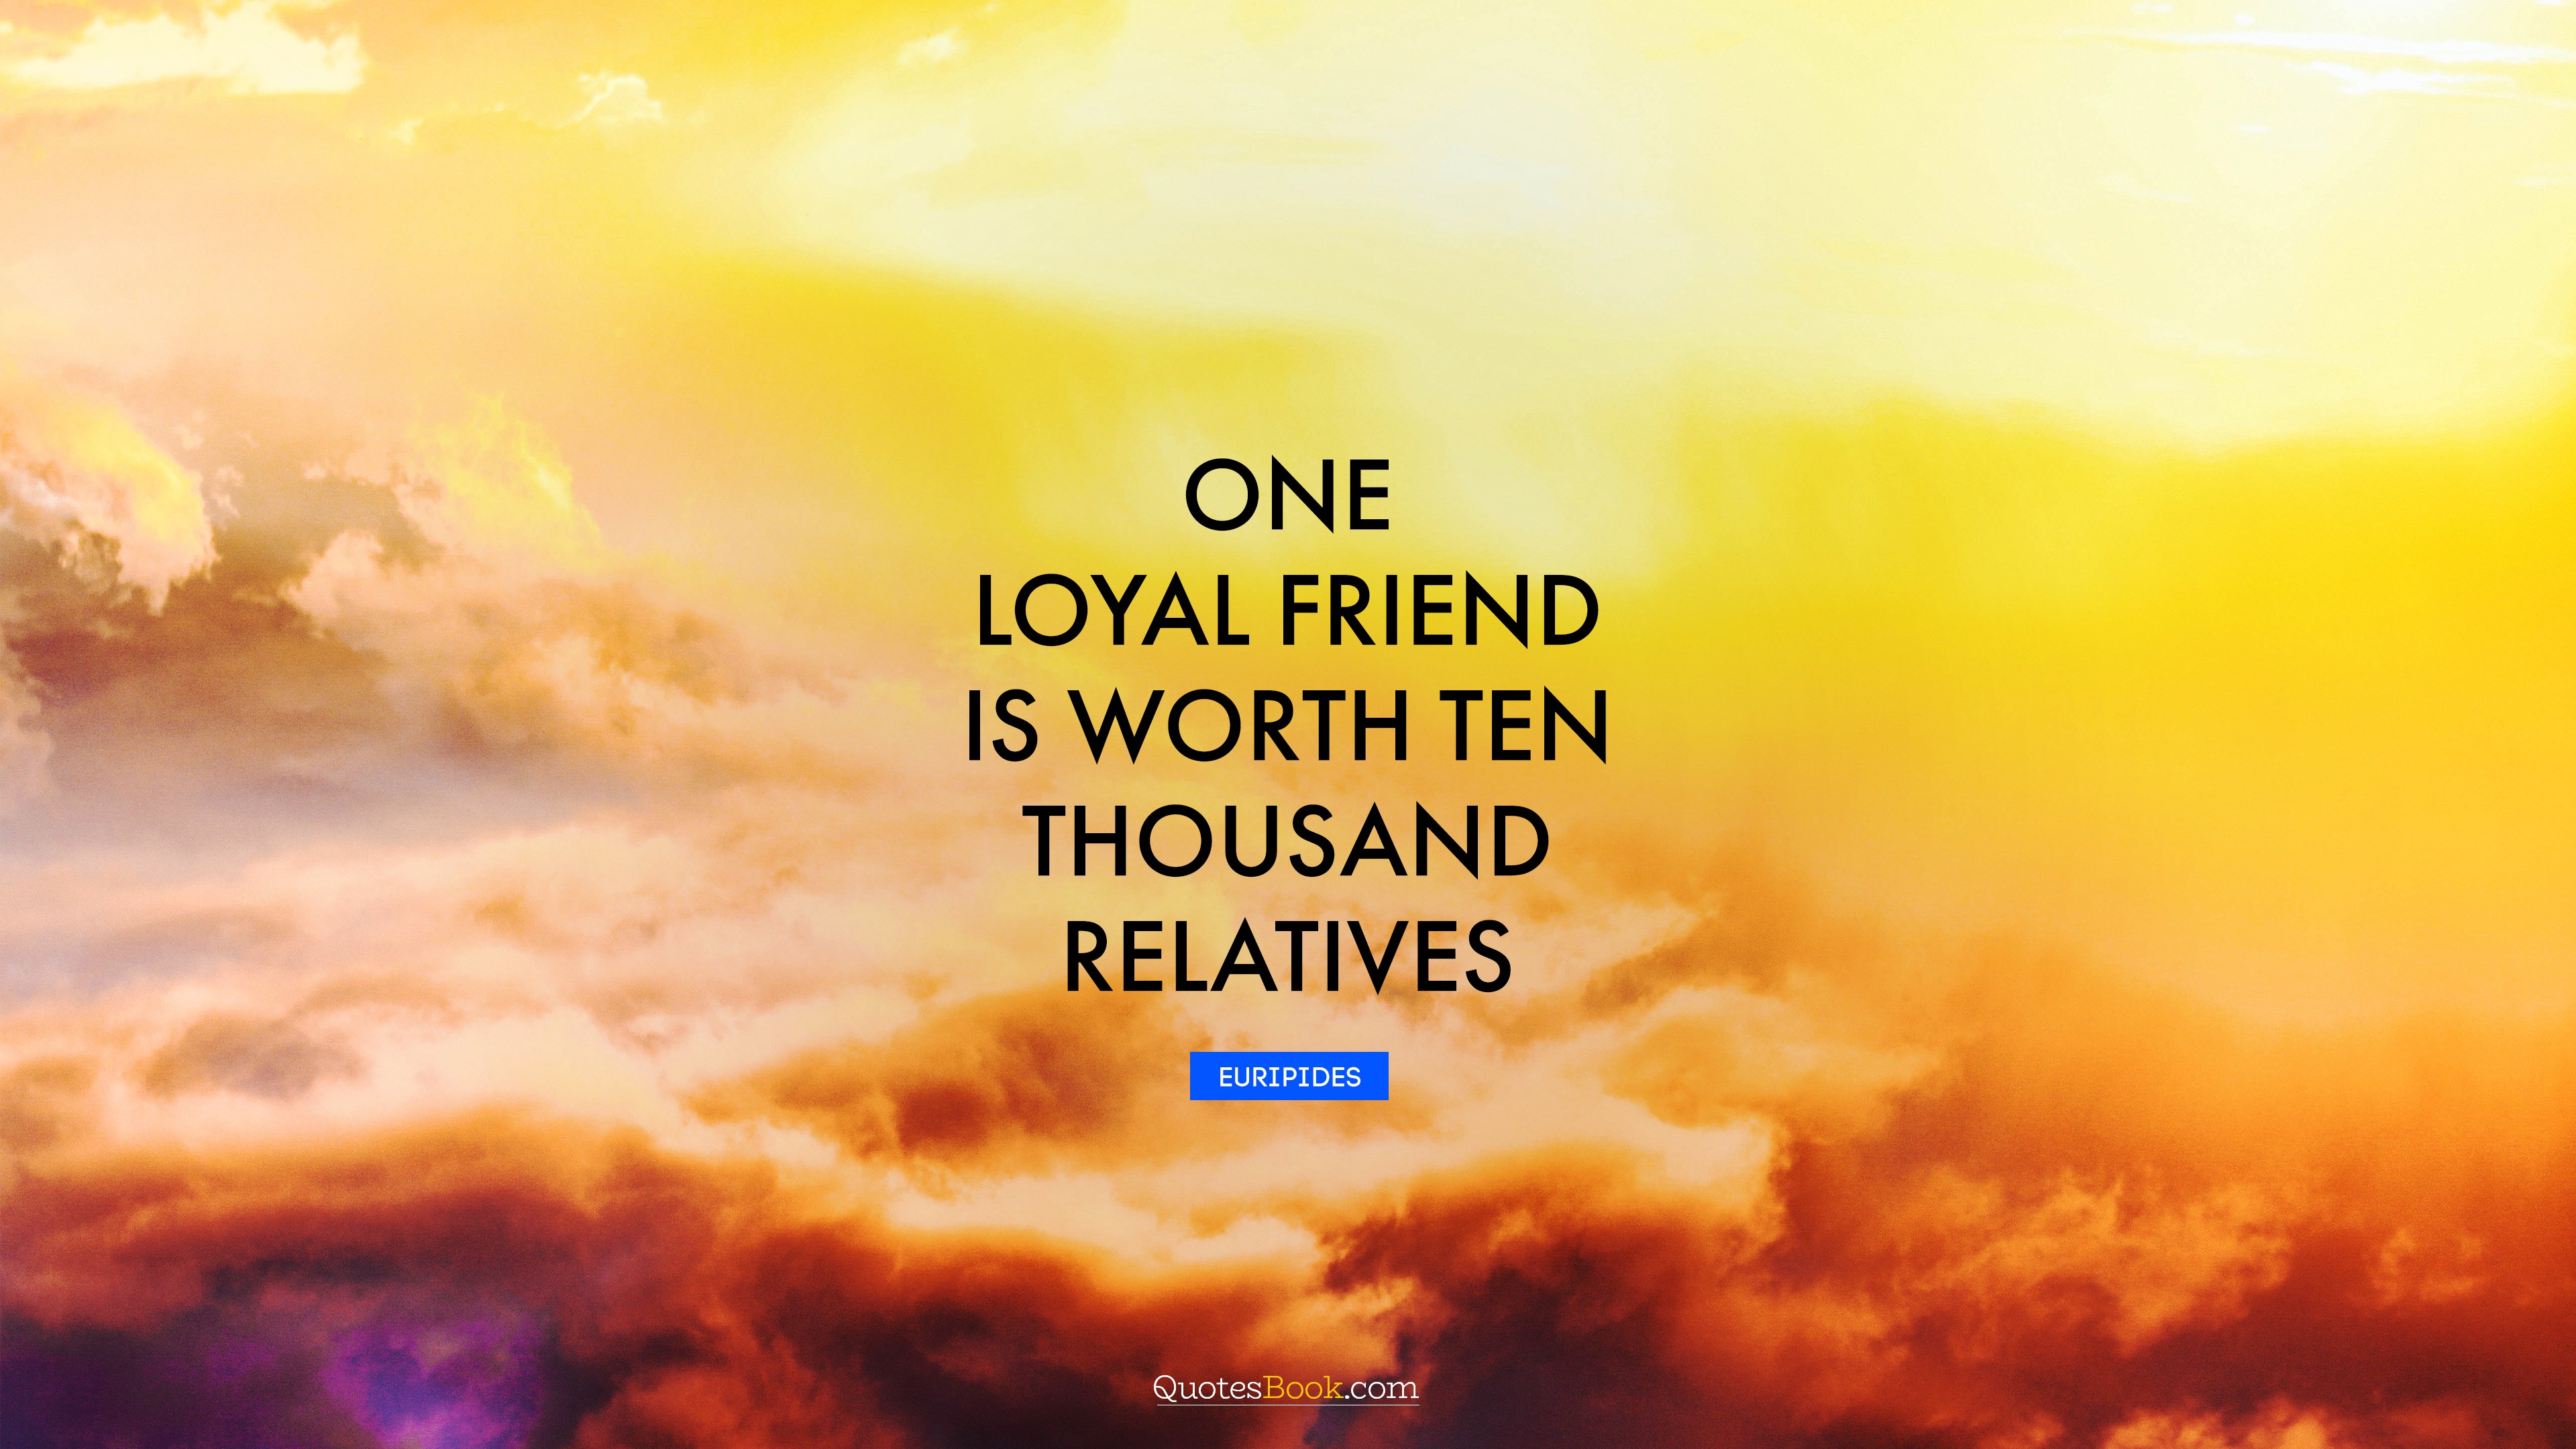 One loyal friend is worth ten thousand relatives. - Quote by ...